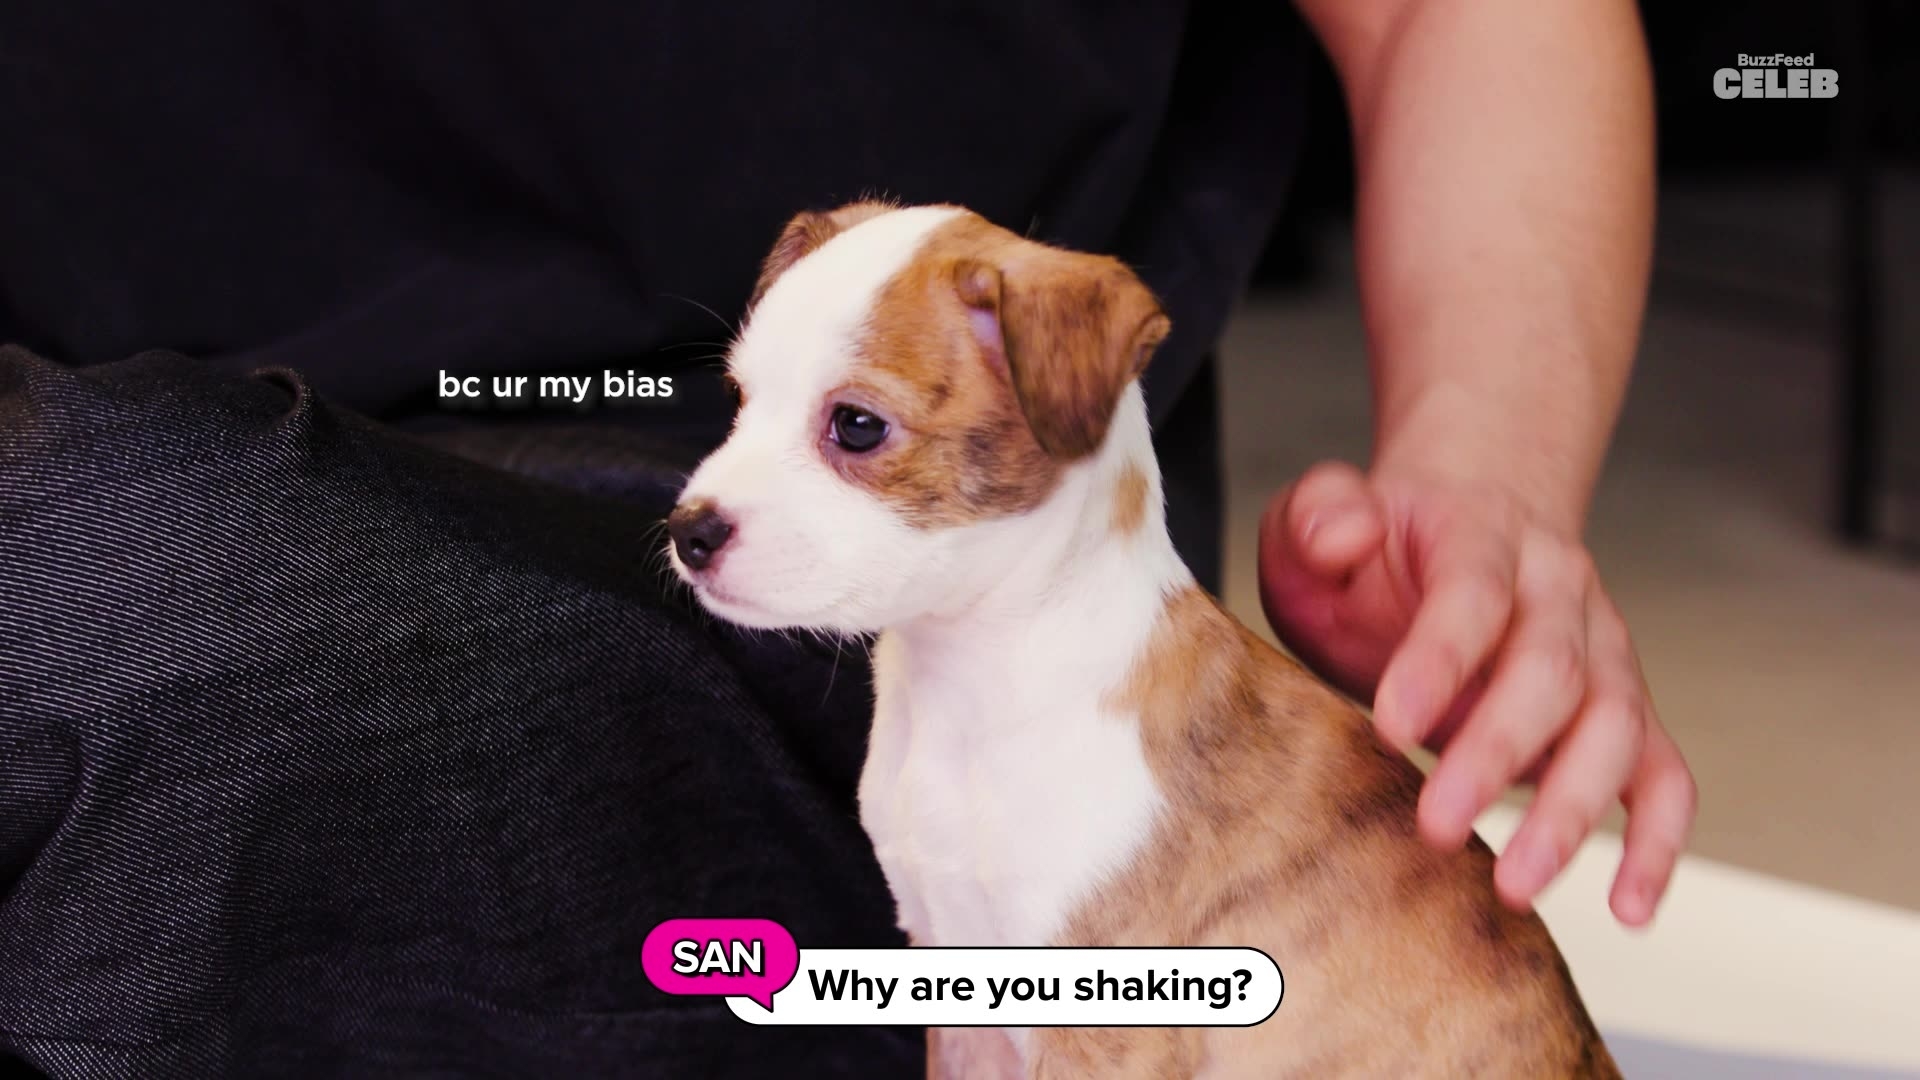 Close-up of a puppy, with quote from San, &quot;Why are you shaking?&quot; and response: &quot;bc ur my bias&quot;